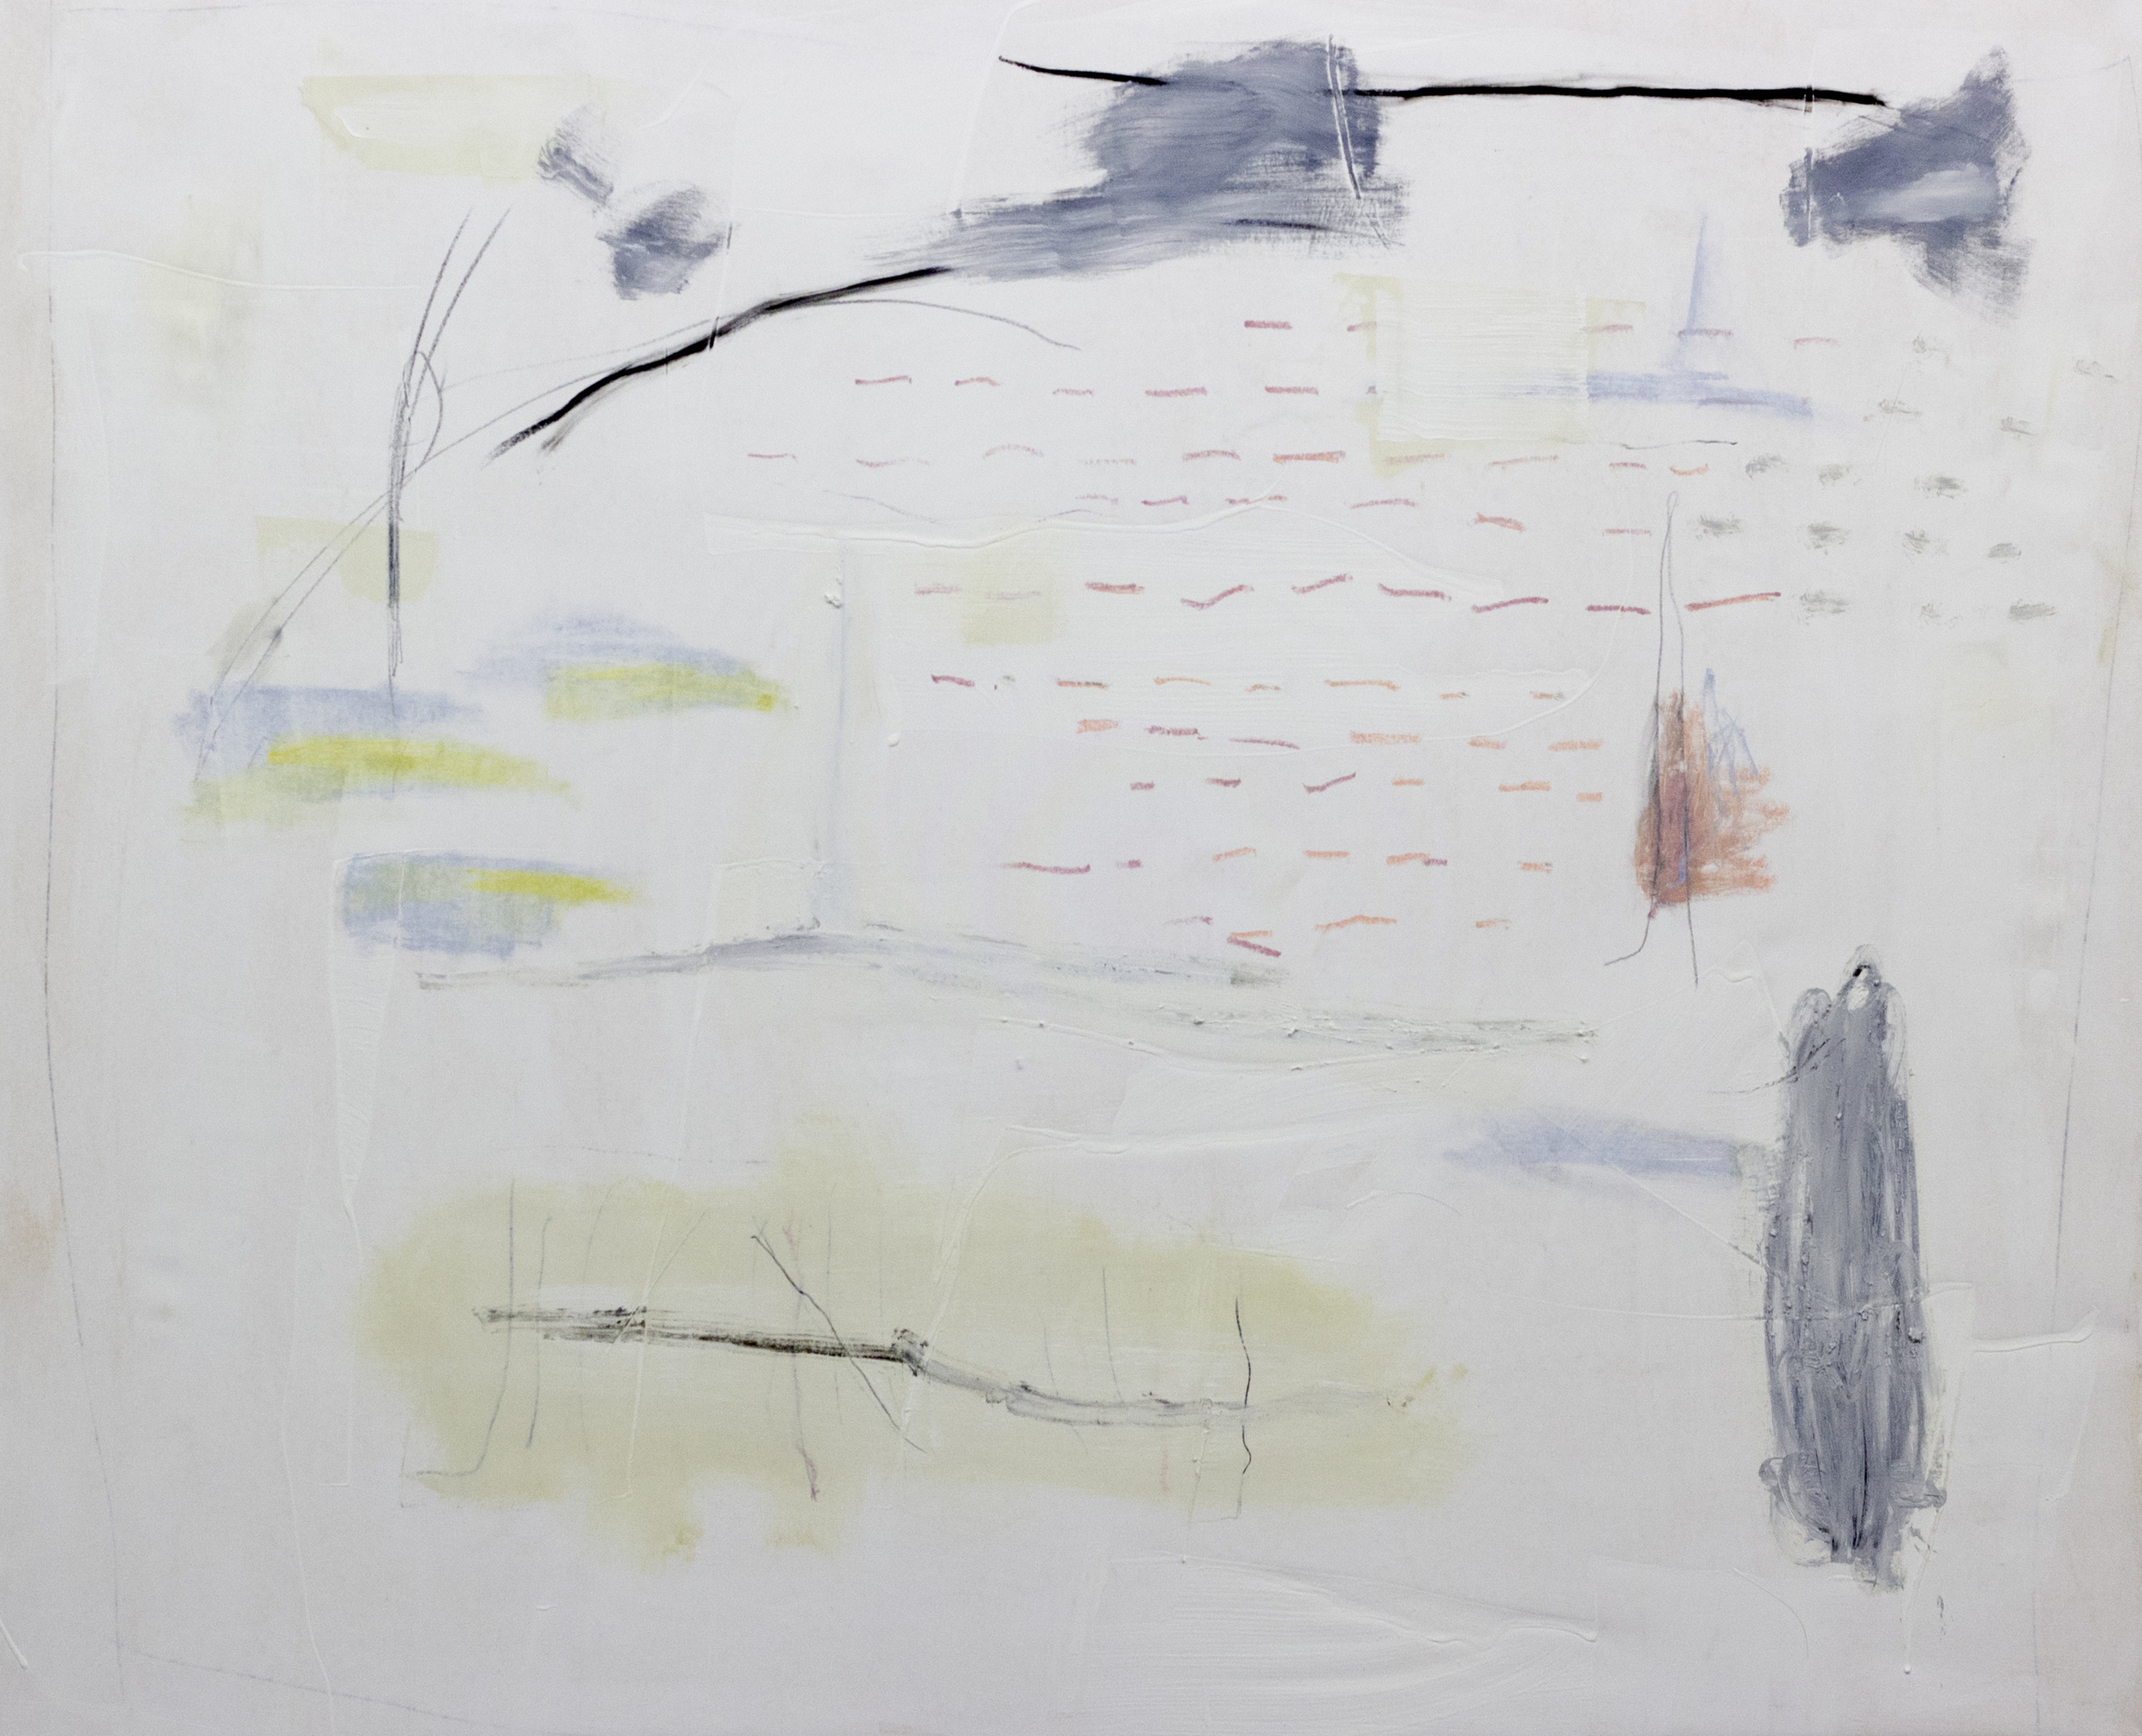   Waltz No. 1 , 2015  46 x 56 Inches  Acrylic, Oil, Graphite, Charcoal, Chalk Pastel, Crayon, and Oil Stick on Canvas  Private Collection 